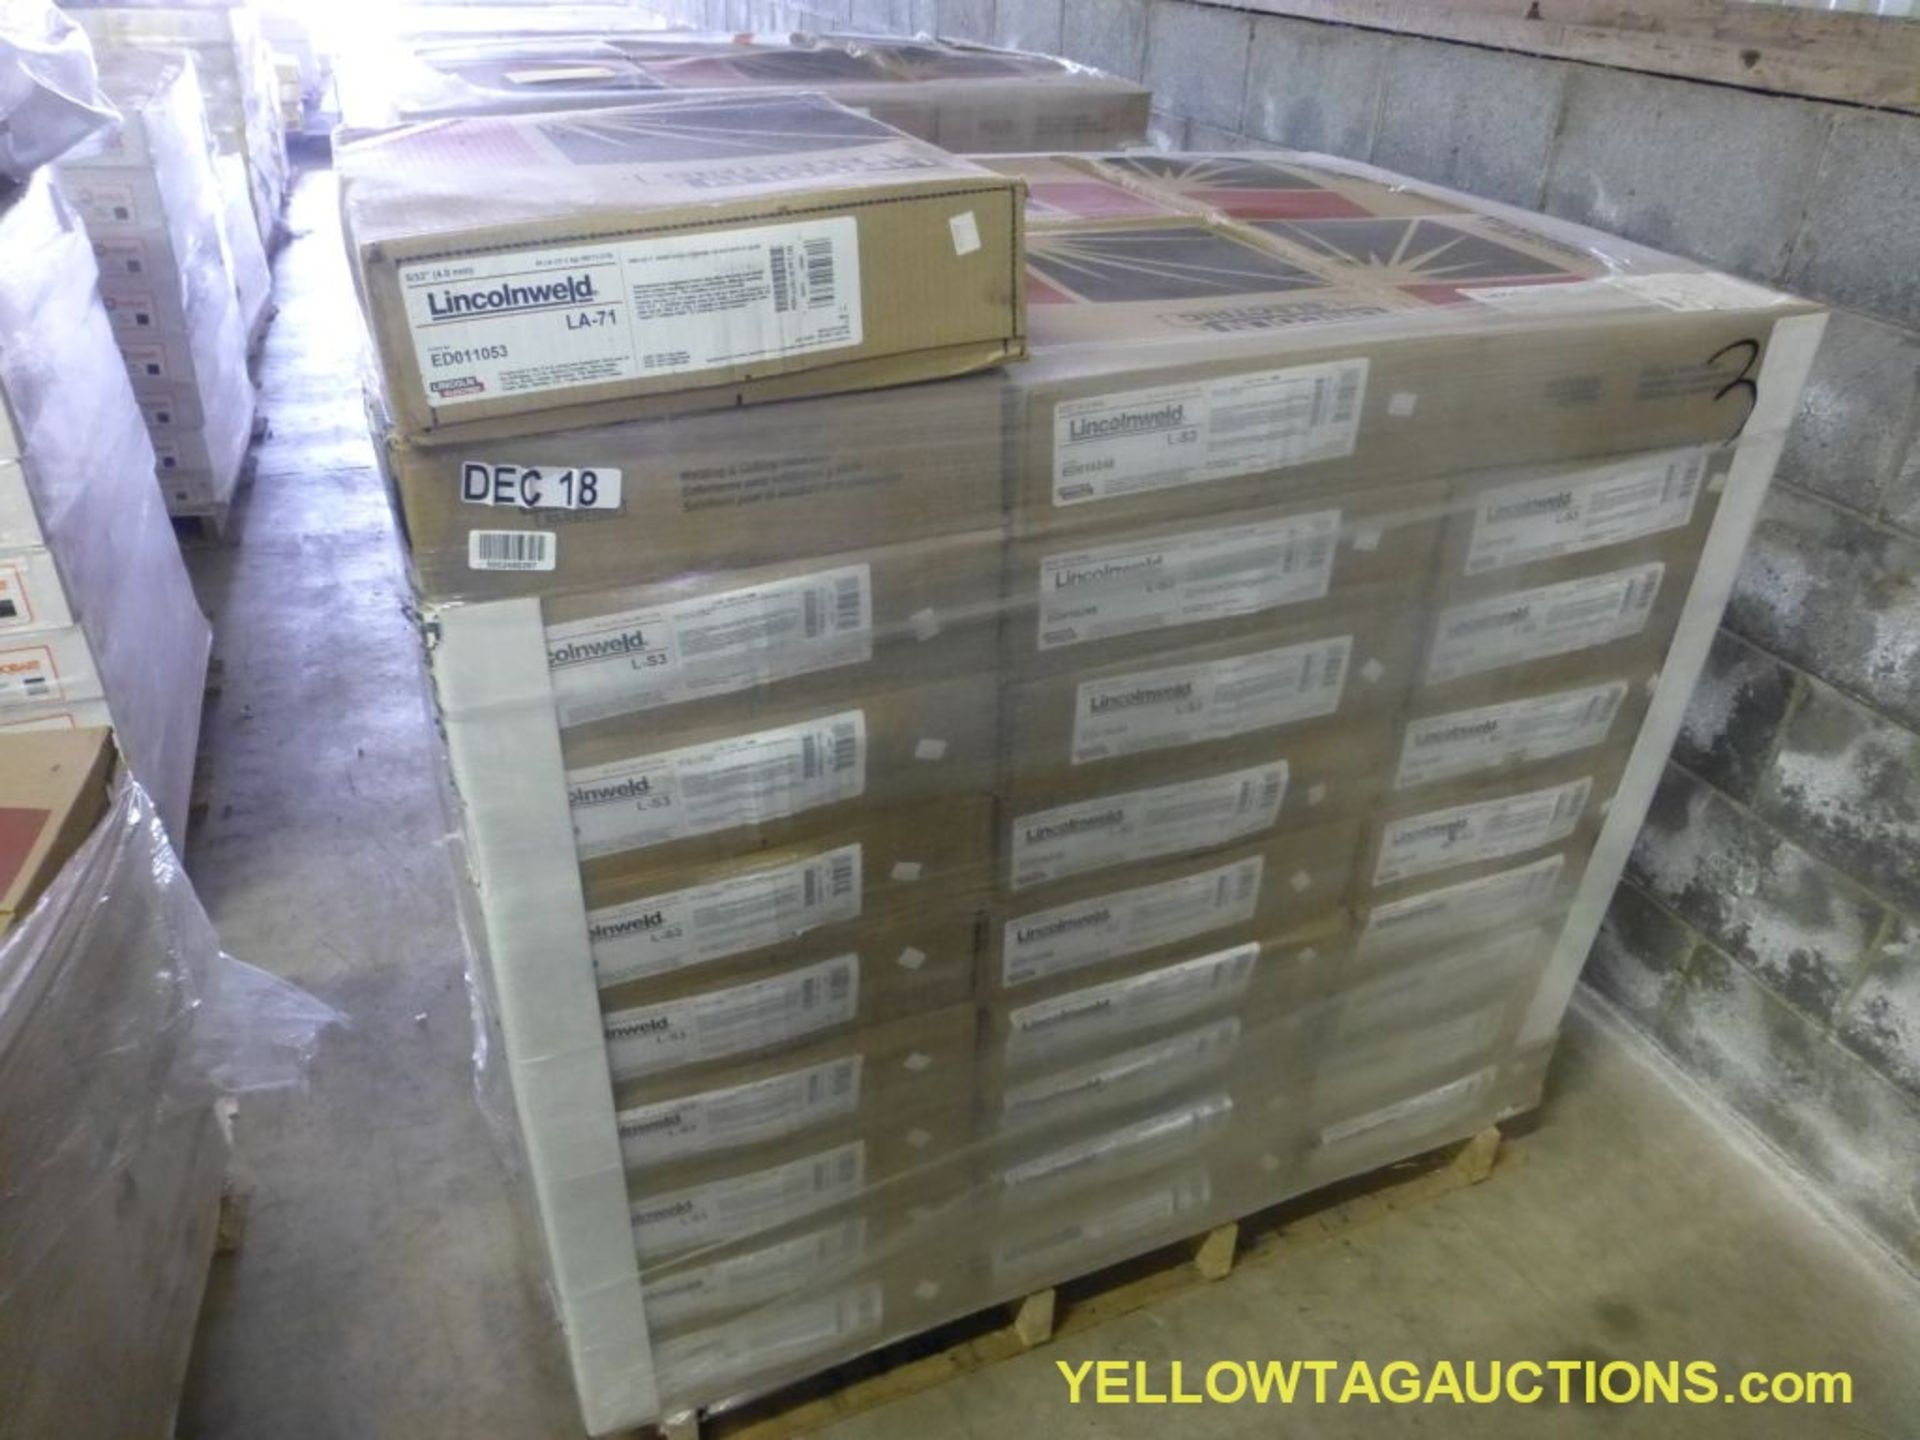 Lot of (54) Boxes of Lincoln Electric Lincolnweld L-S3 Welding Wire | Model No. ED015 248; New Surpl - Image 2 of 5